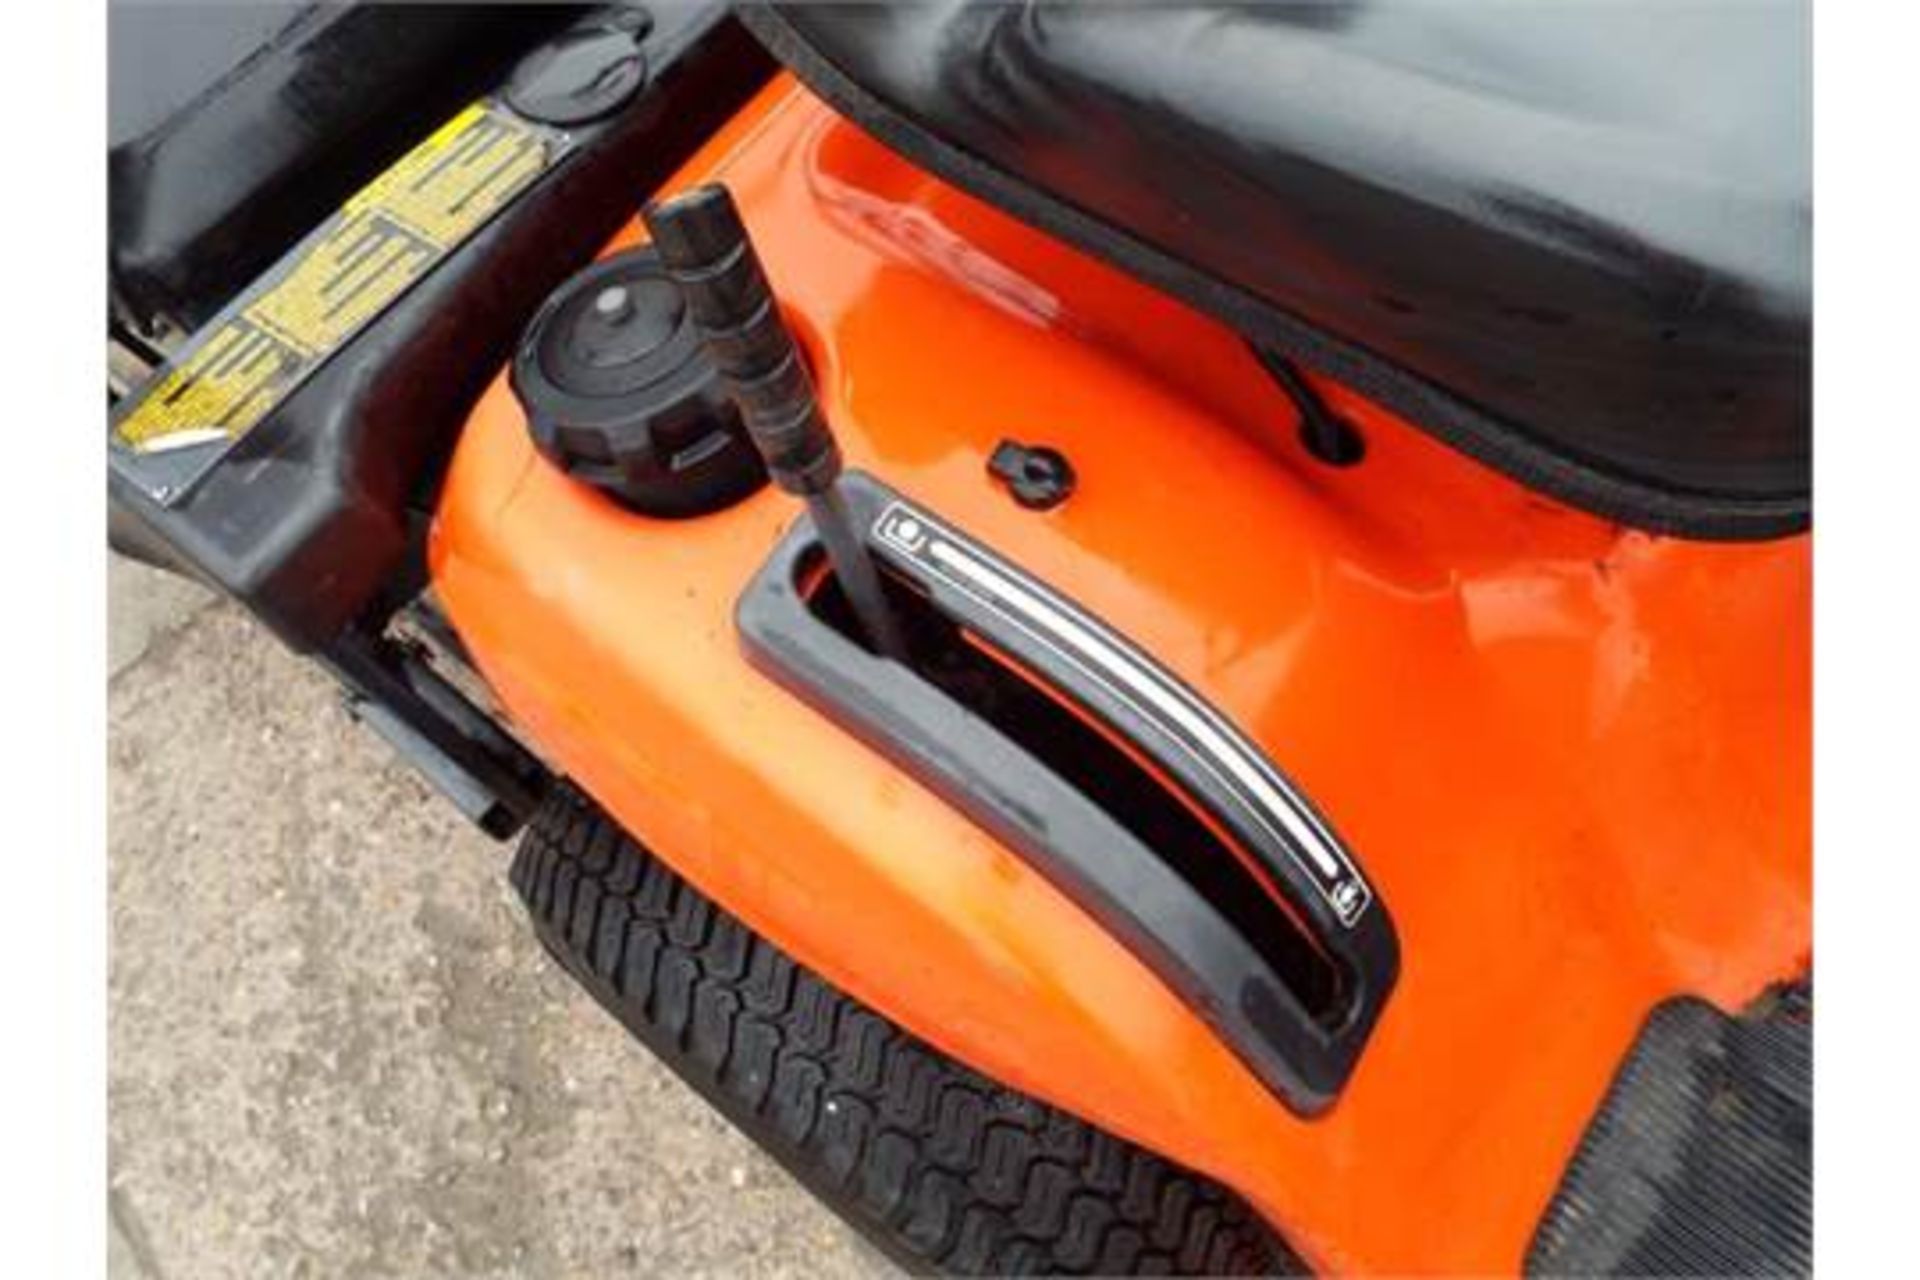 2008 Kubota G21 Ride On Mower with Glide-Cut System and High Dump Grass Collector - Image 13 of 22